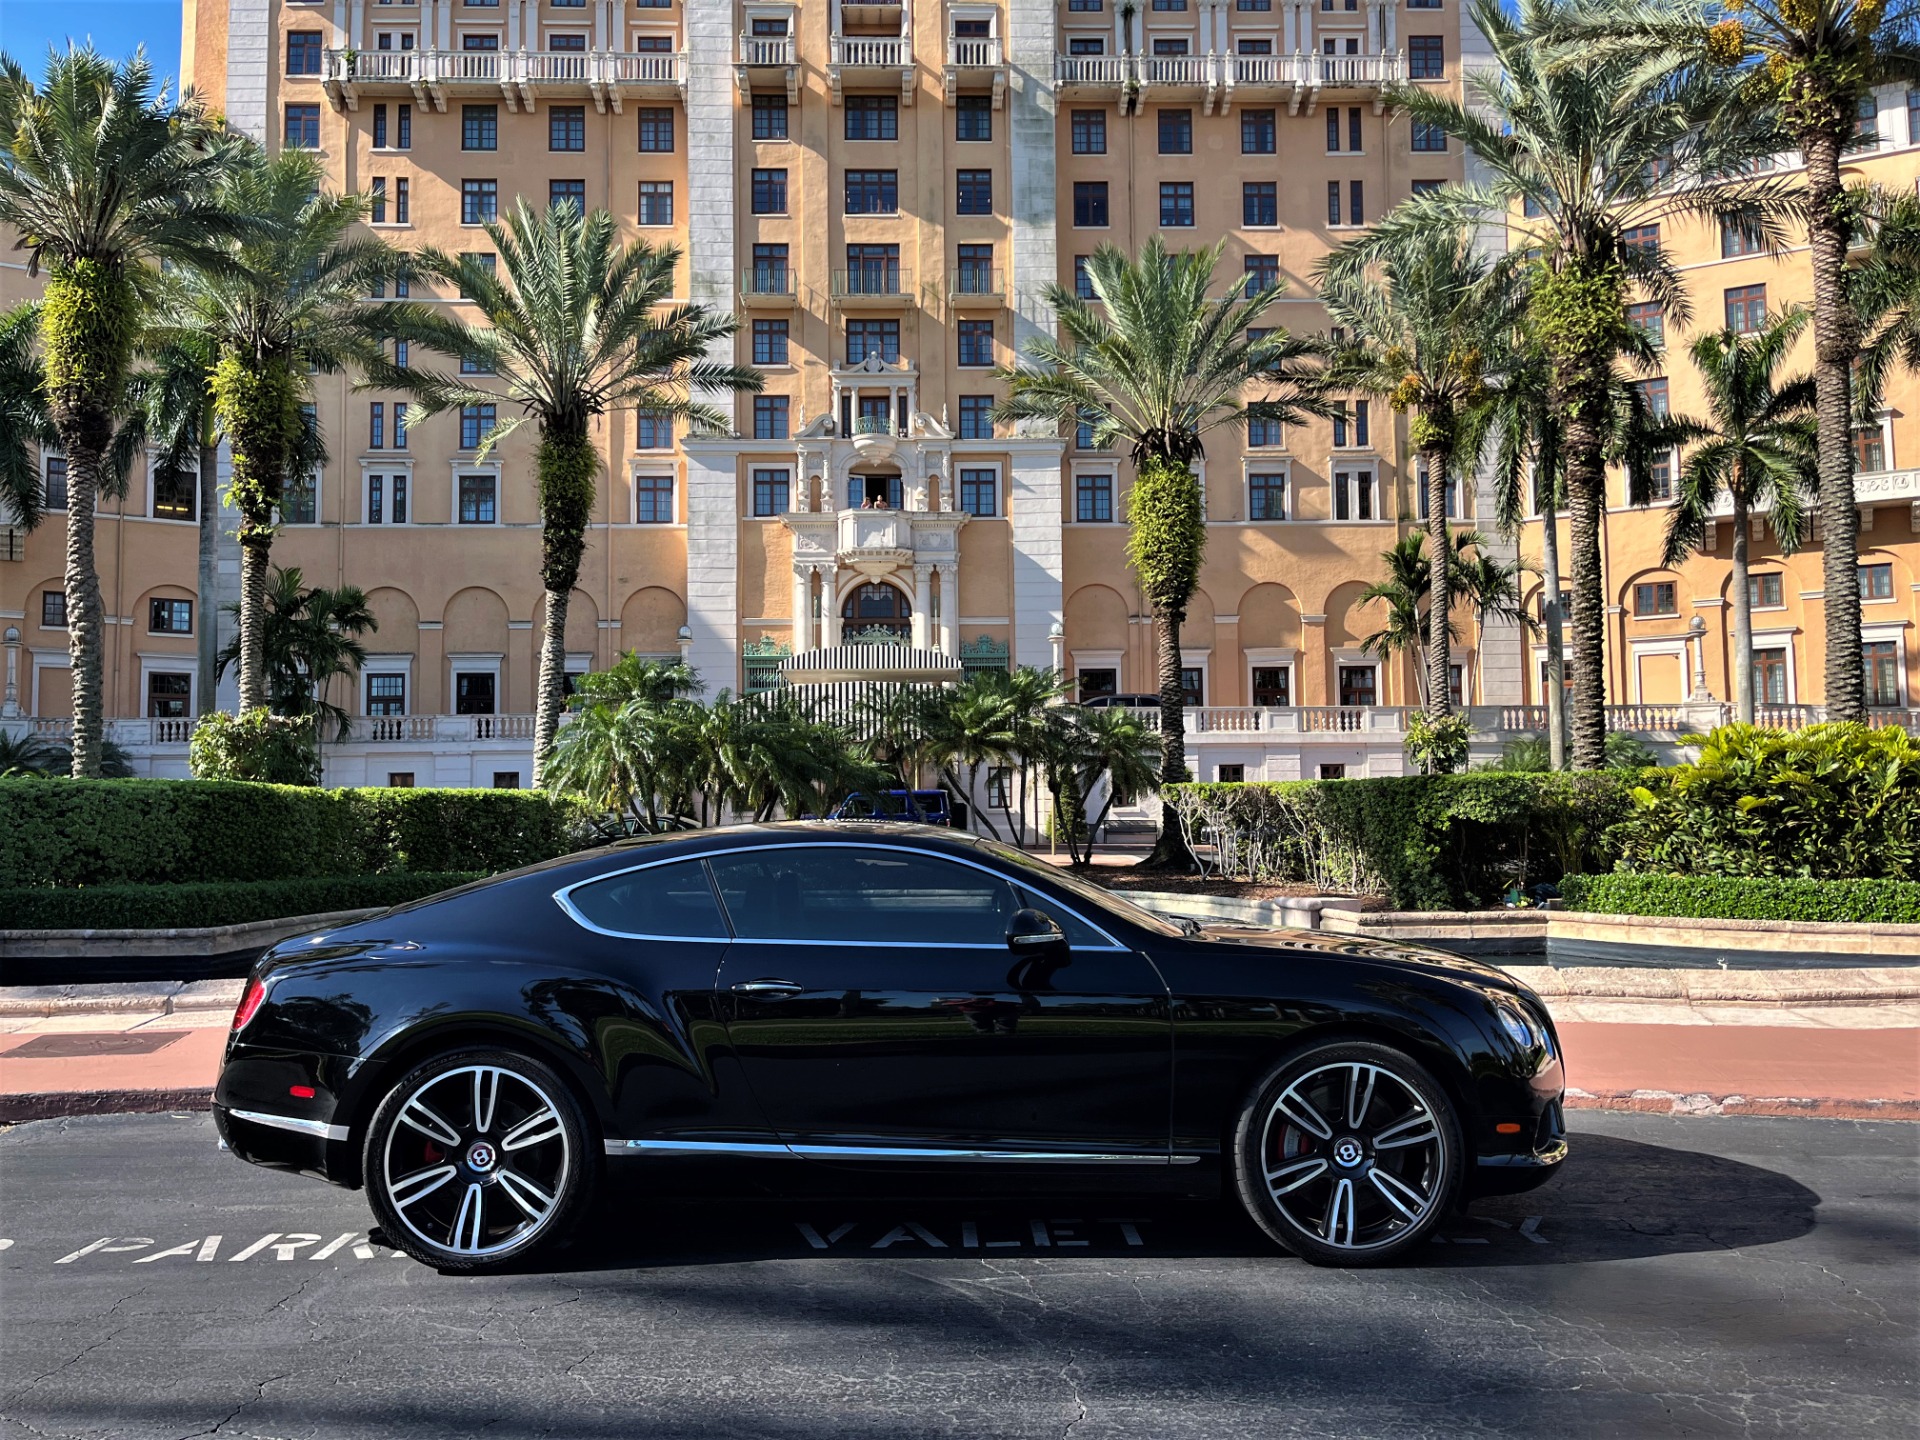 Used 2014 Bentley Continental GT V8 for sale $97,850 at The Gables Sports Cars in Miami FL 33146 1